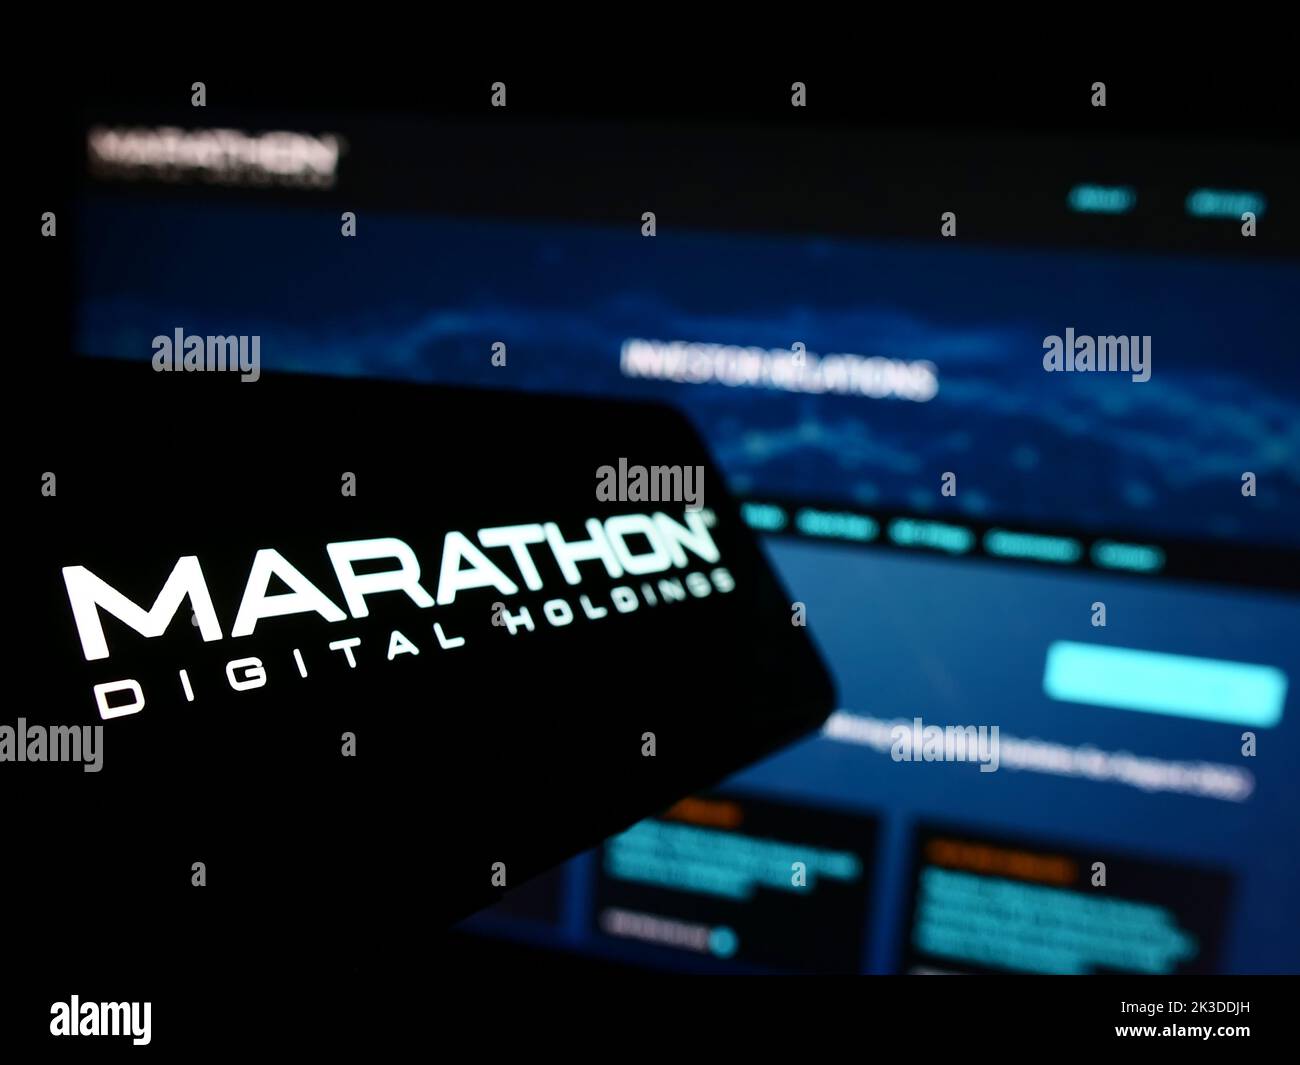 Mobile phone with logo of American company Marathon Digital Holdings Inc. on screen in front of business website. Focus on left of phone display. Stock Photo